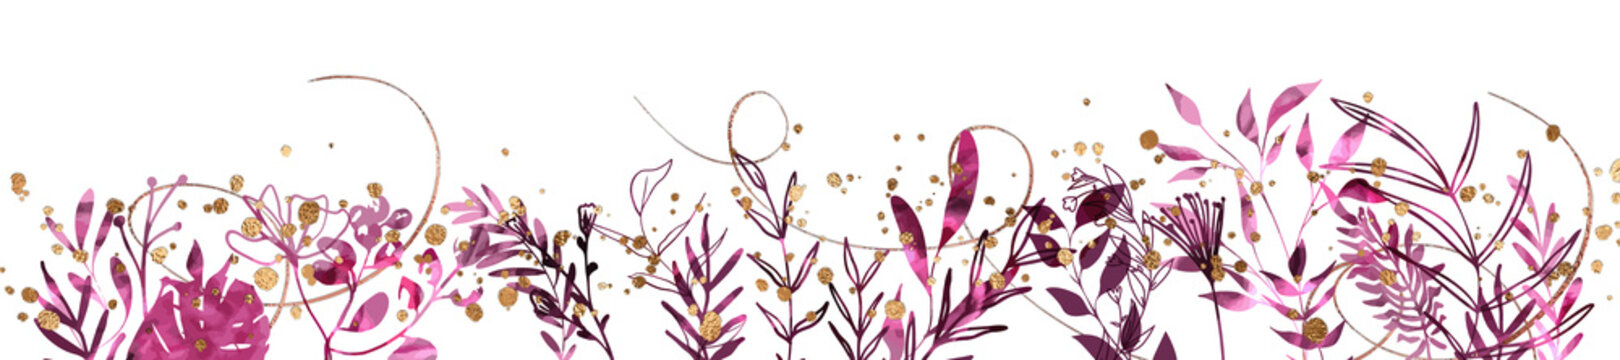 Watercolor plants with leaves and golden grasses. Background with floral elements, botanical watercolor illustration with gold splashes and decorated with gold ribbons. Design elements for cards, web © beoyou